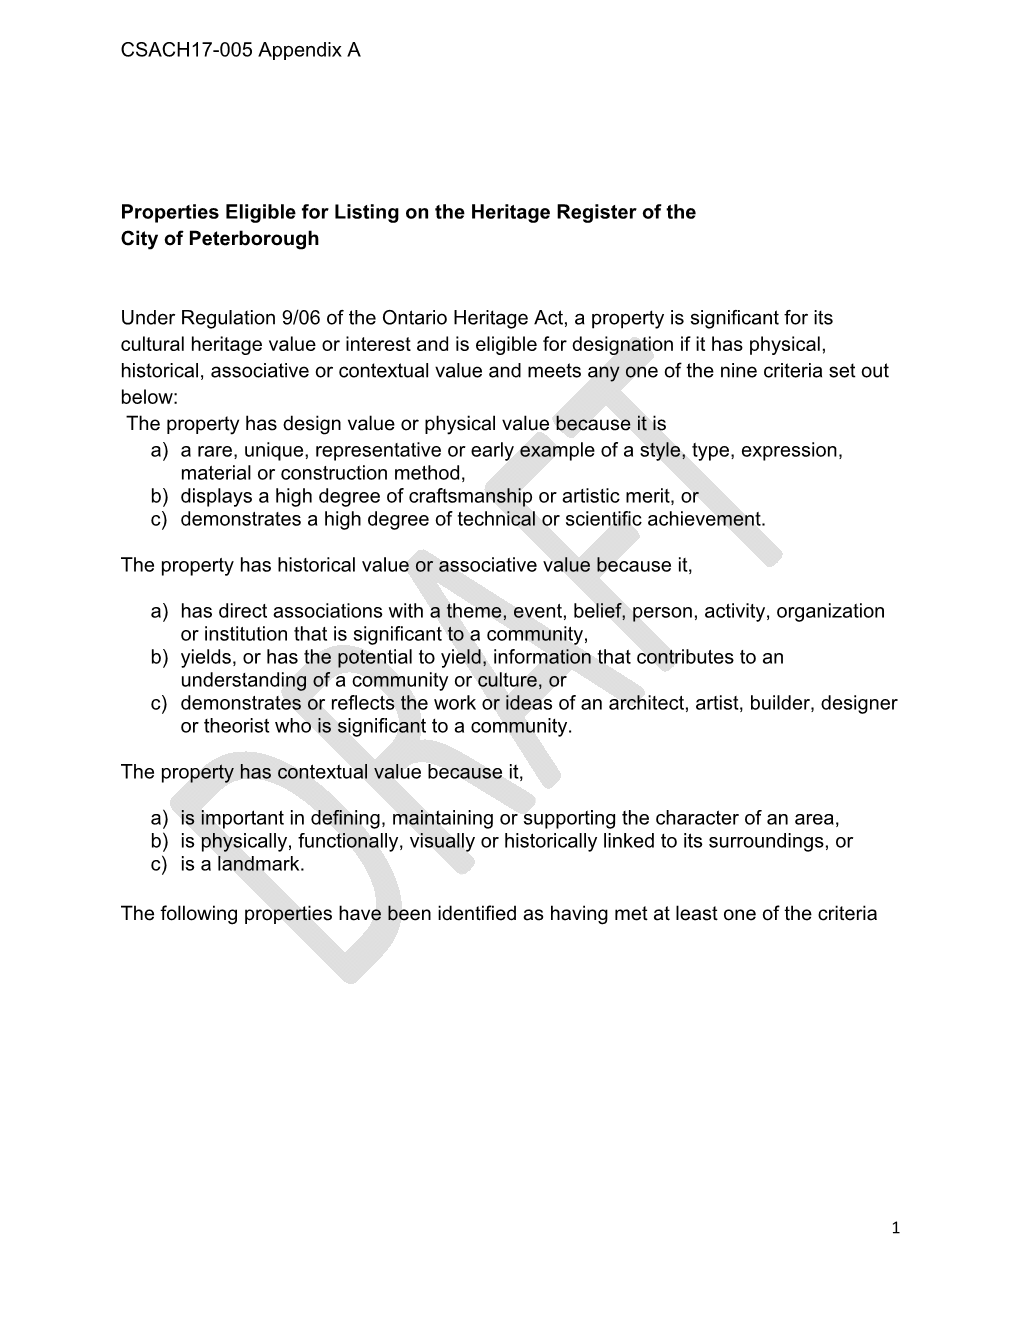 Properties Eligible for Listing on the Heritage Register of the City of Peterborough